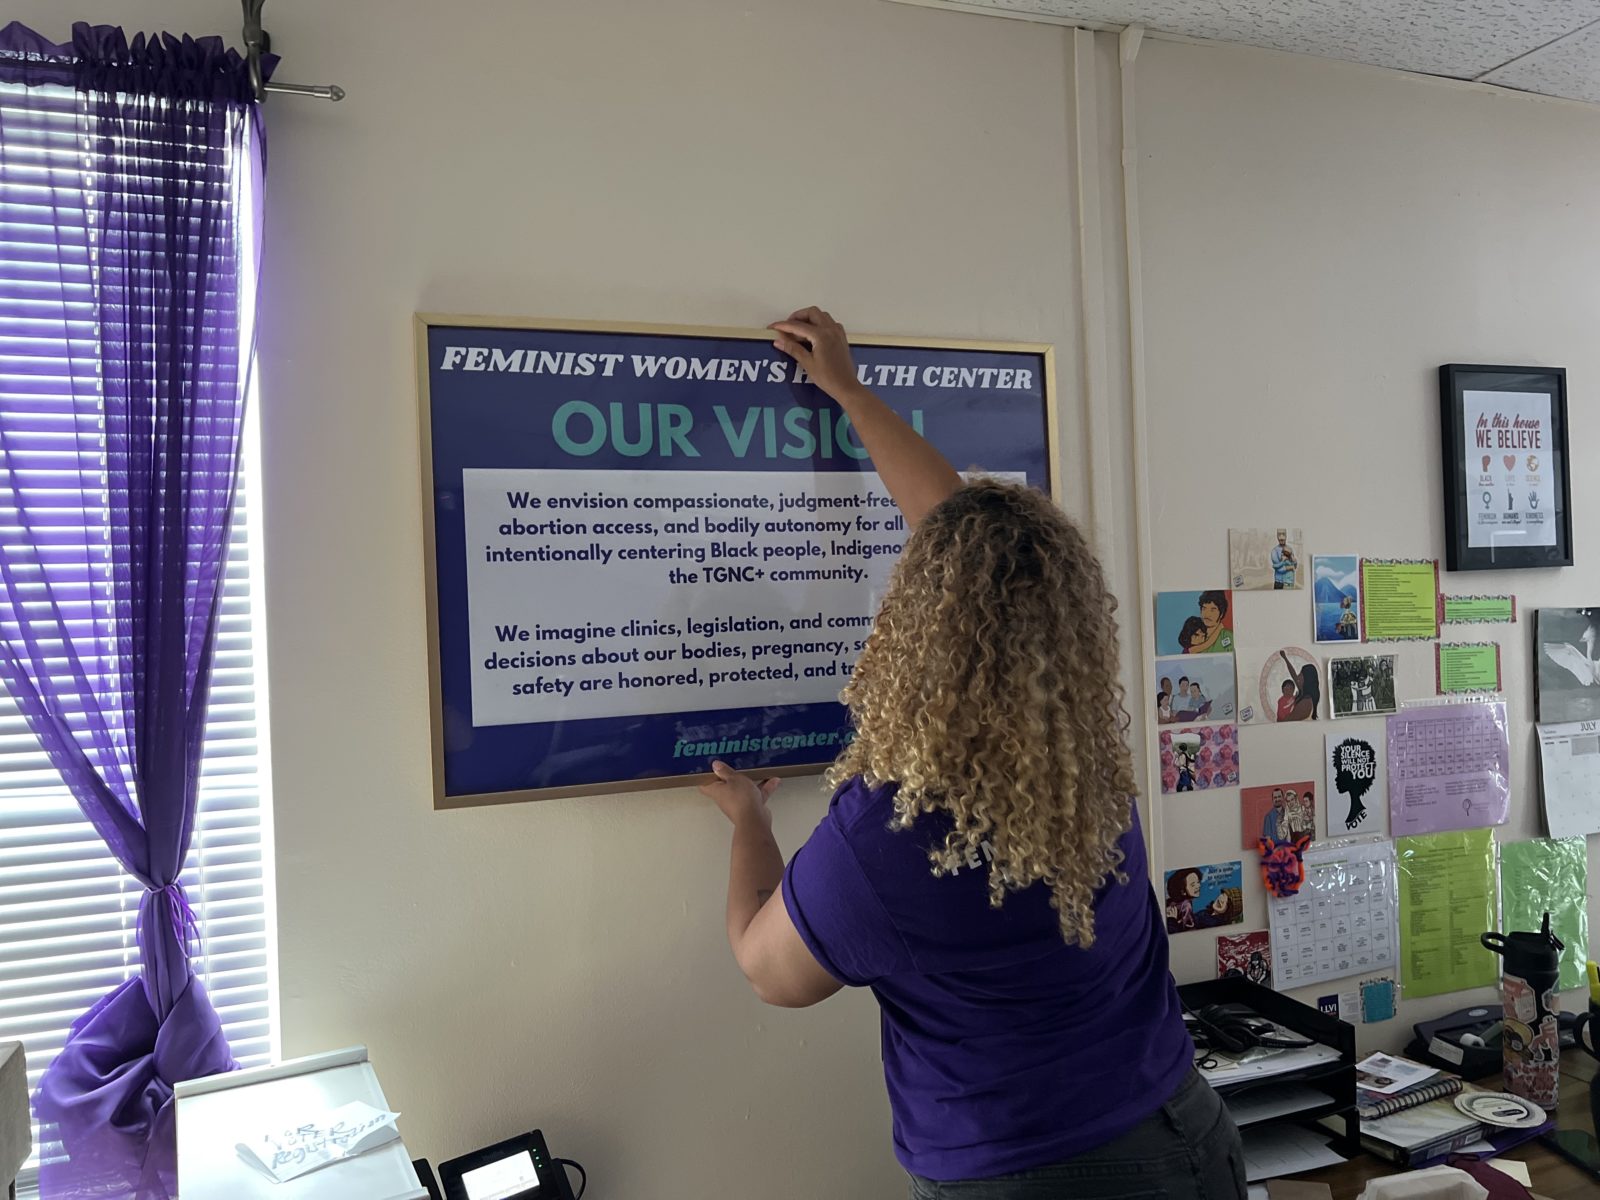 MK Anderson, A woman at Feminist Women’s Health Center hangs a new sign on a wall in the clinic’s call center.